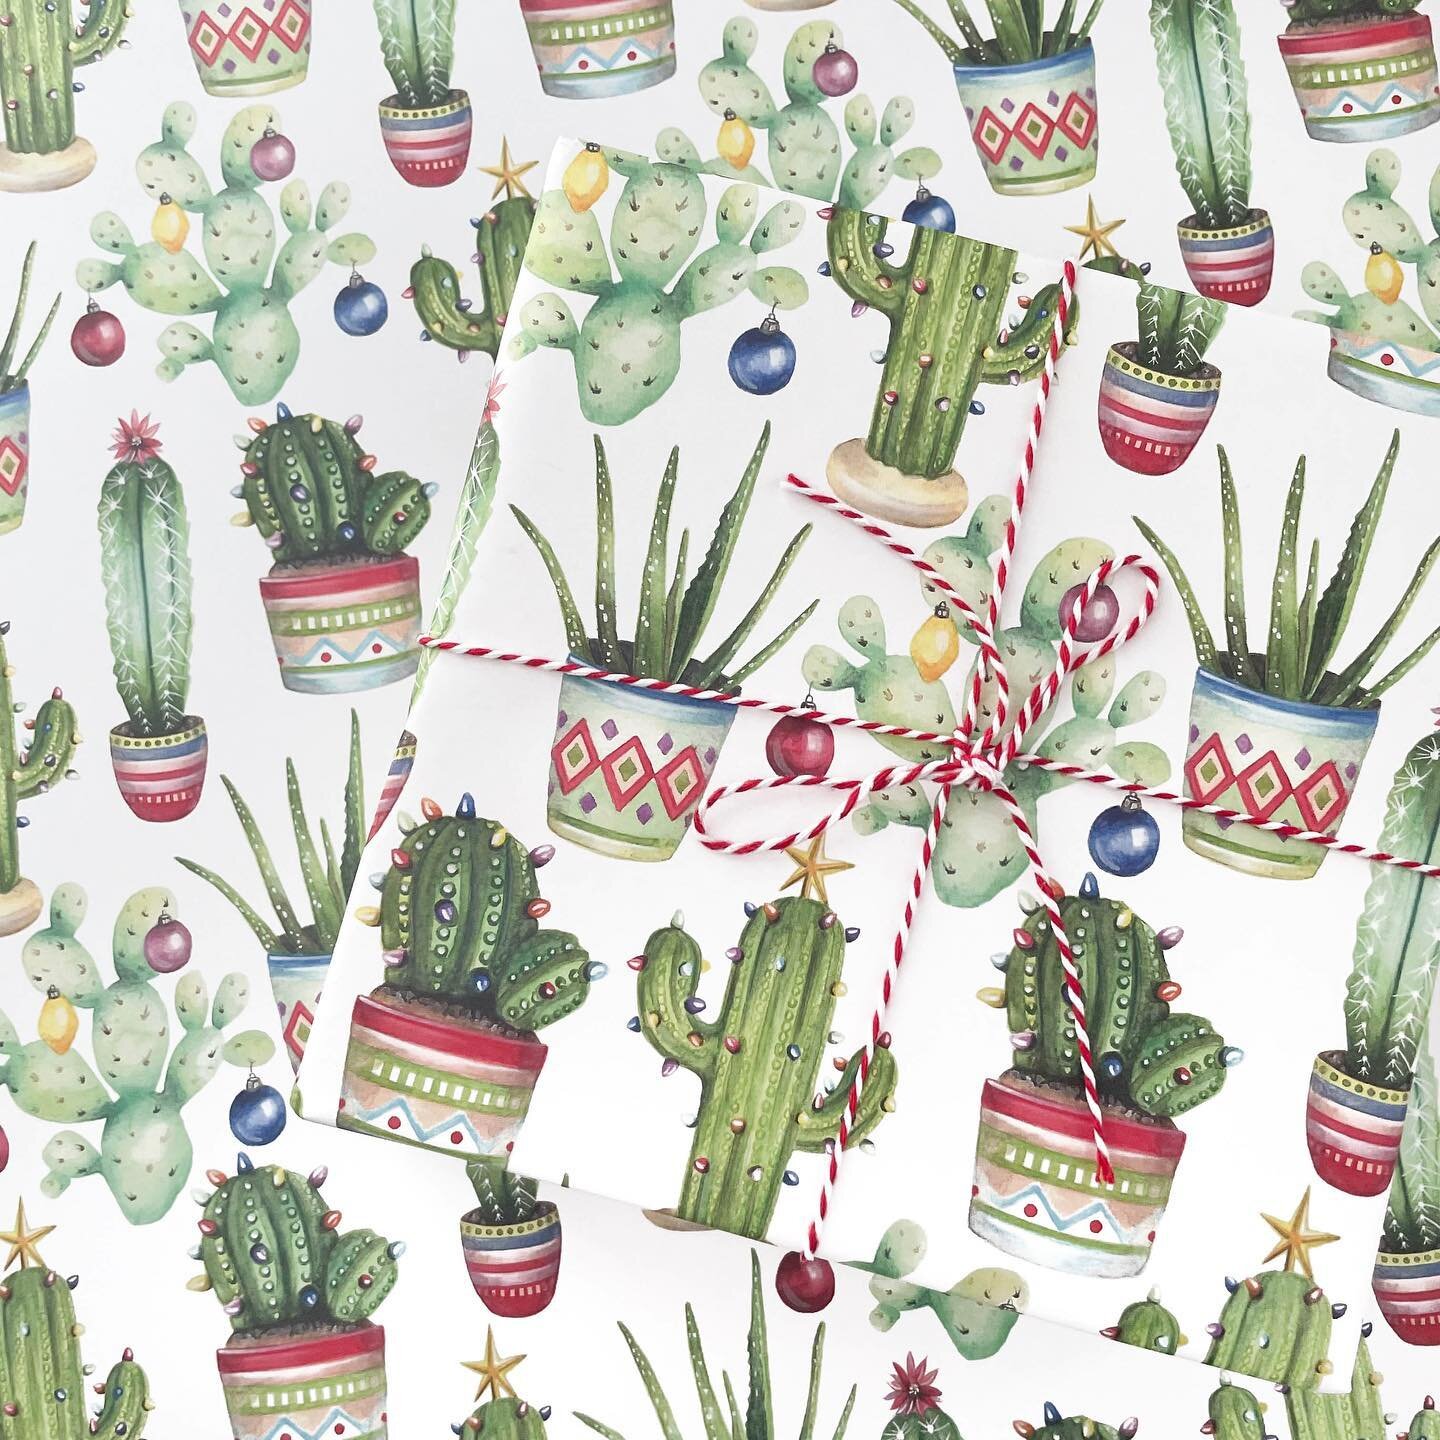 Charming and colorful patterned pots hold cute cactus motifs decked out in holiday style on my new holiday cactus gift wrap! There is still time to get your gift wrapping items before Christmas, so grab a roll (or three!) - perfect for any plant love